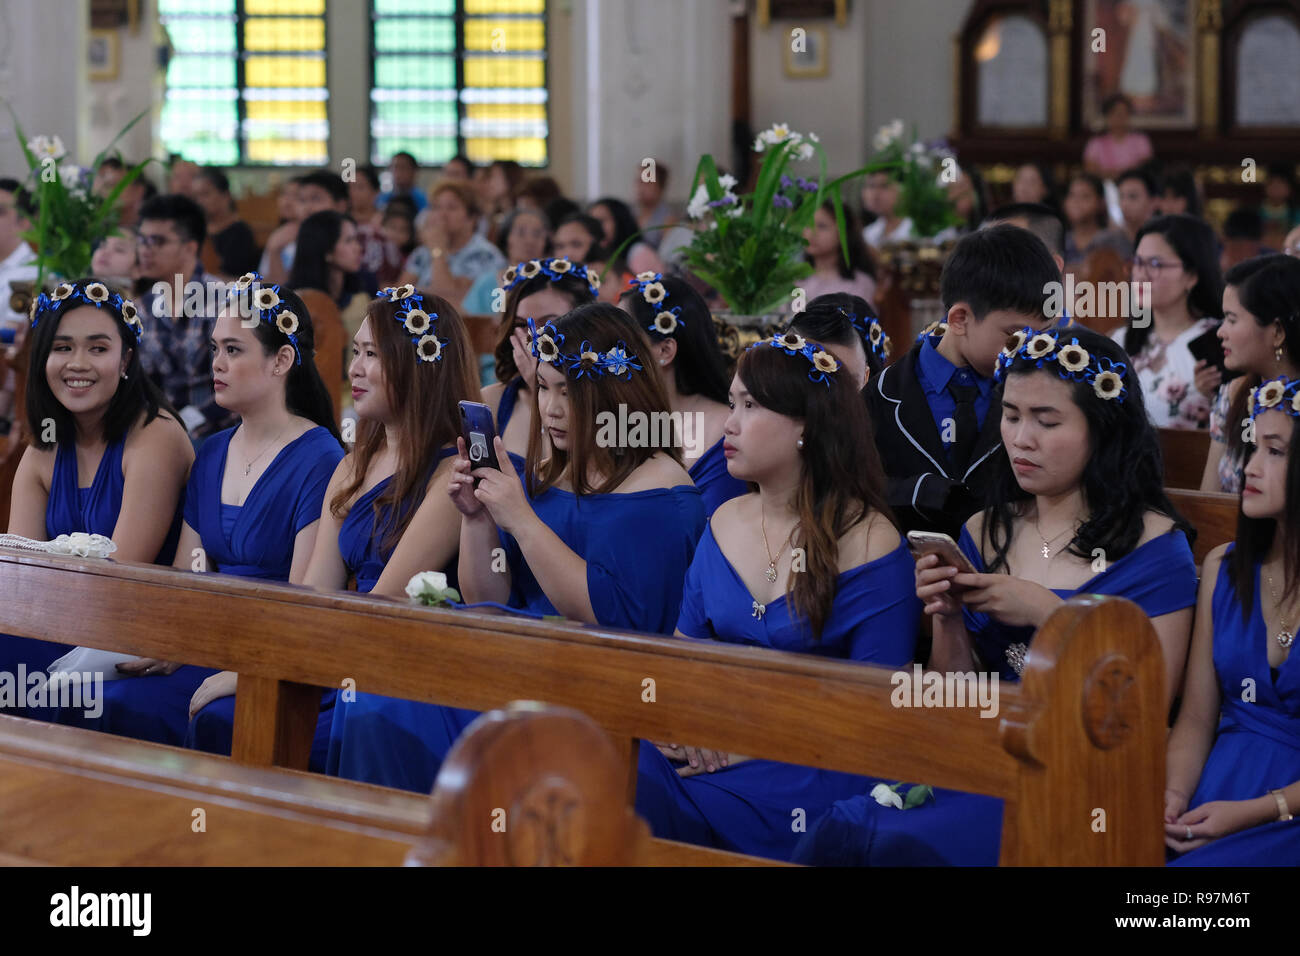 A group of young Filipino women inside the Roman Catholic Antipolo Cathedral or National Shrine of Our Lady of Peace and Good Voyage located in the city of Antipolo, in the province of Rizal in the Philippines. Stock Photo